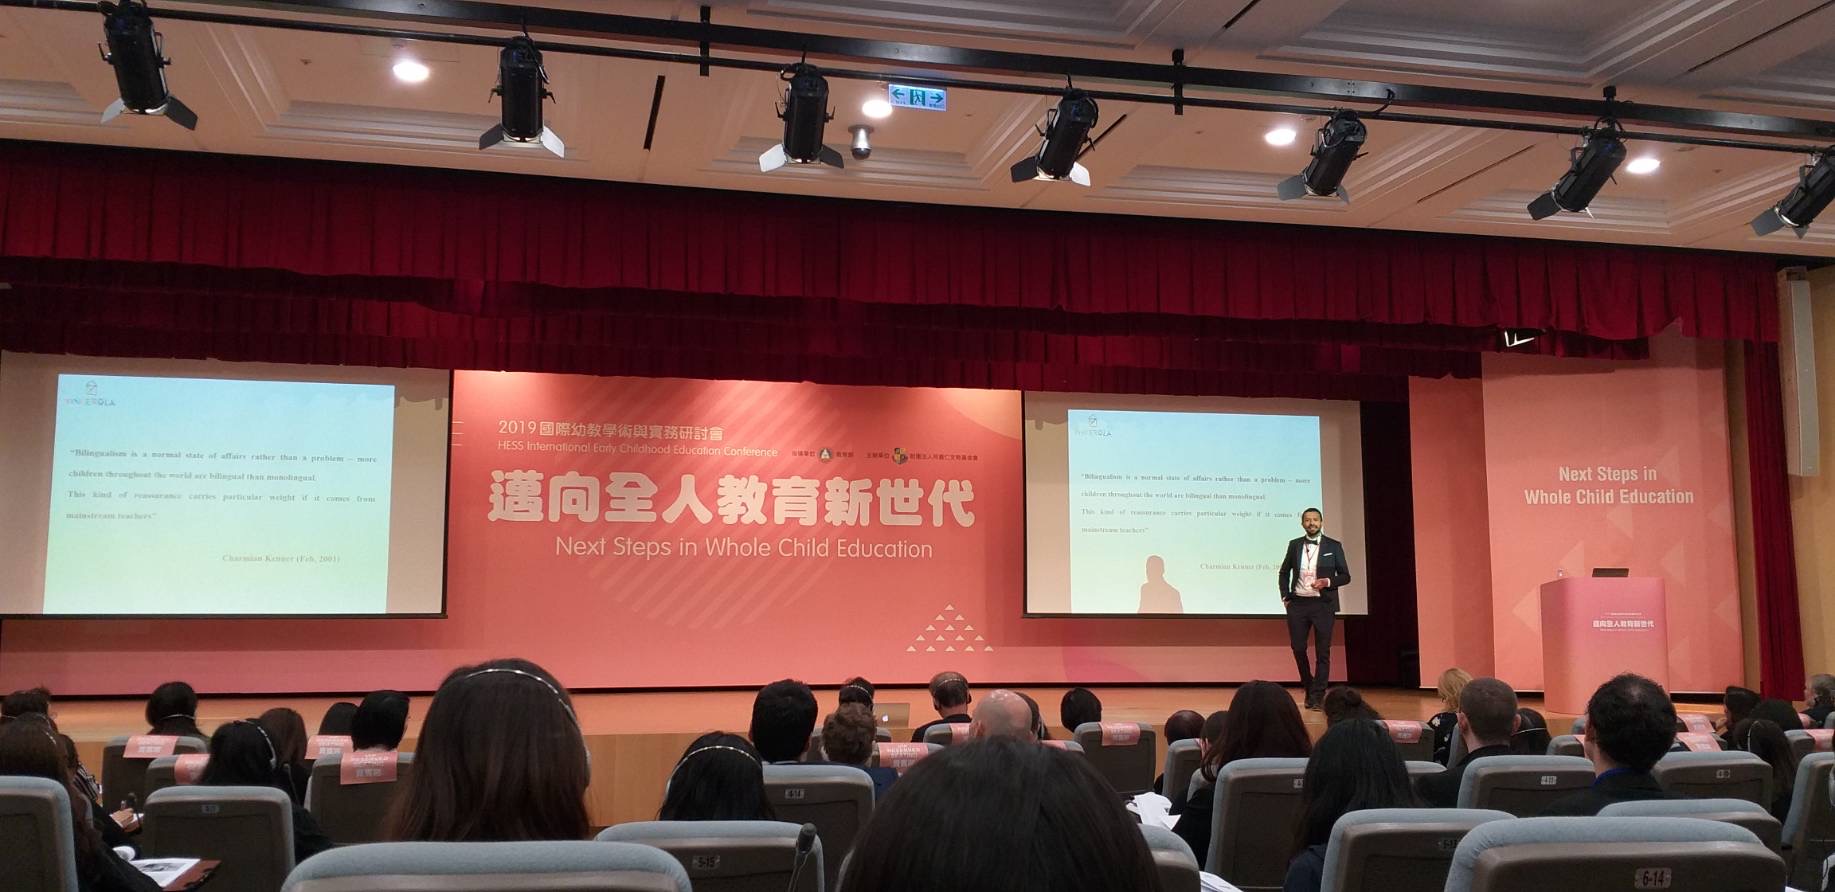 The next steps in whole child education conference in Taiwan 2019